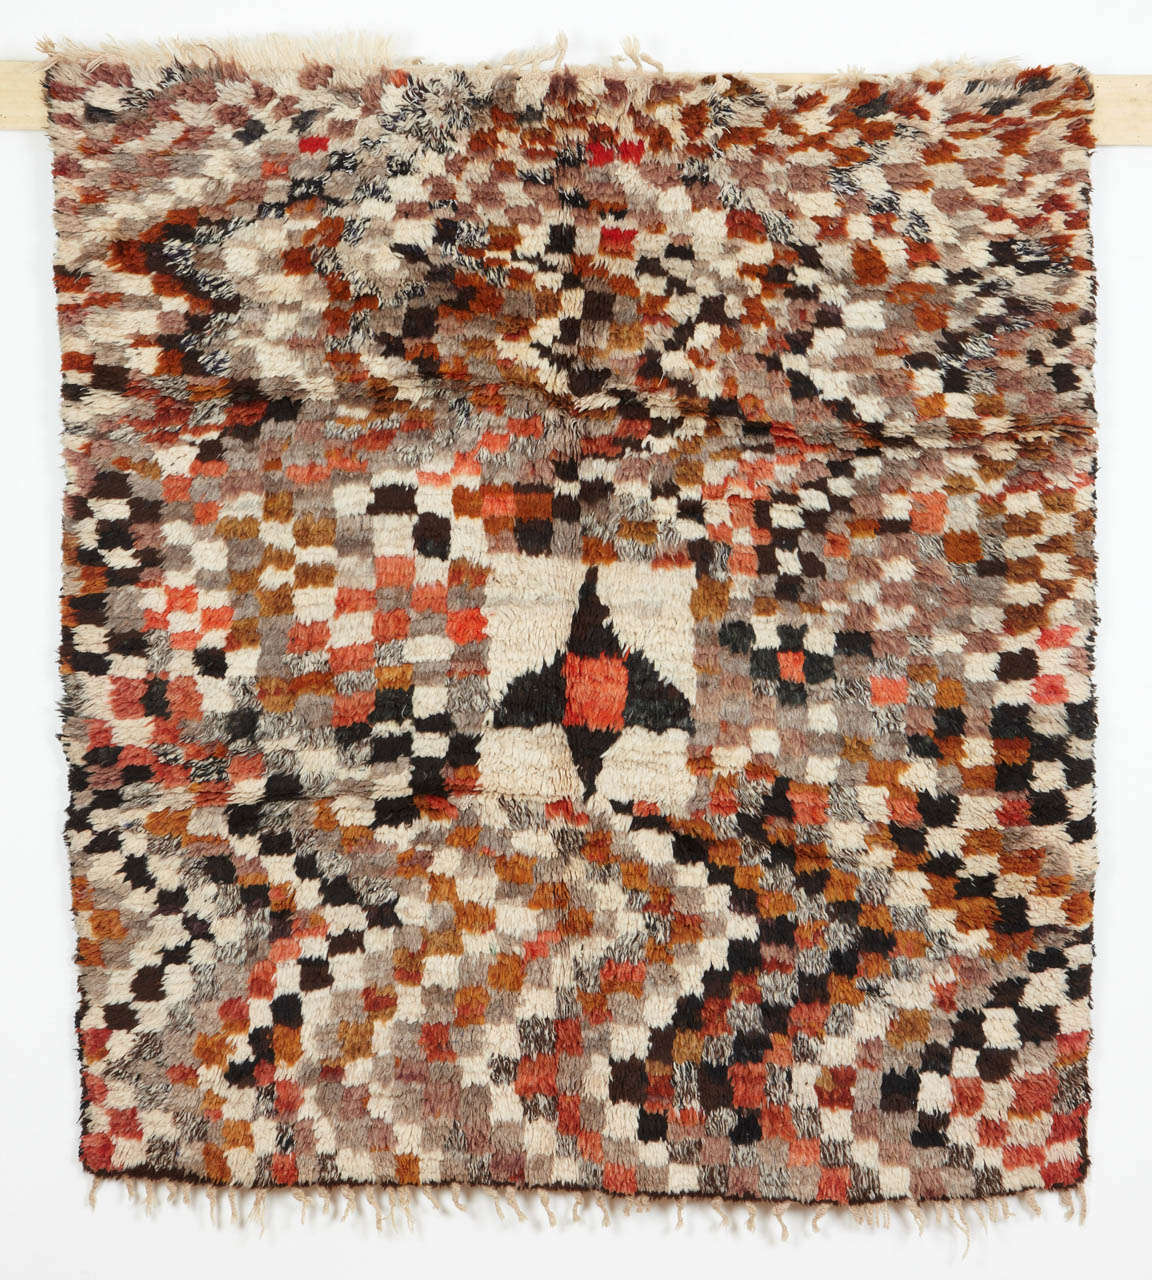 A group of rugs from the Azilal region, located in the central High Atlas, are distinguished by funky renditions of Moroccan carpet designs. This thick piled example displays an abstract variation on the checkerboard pattern.